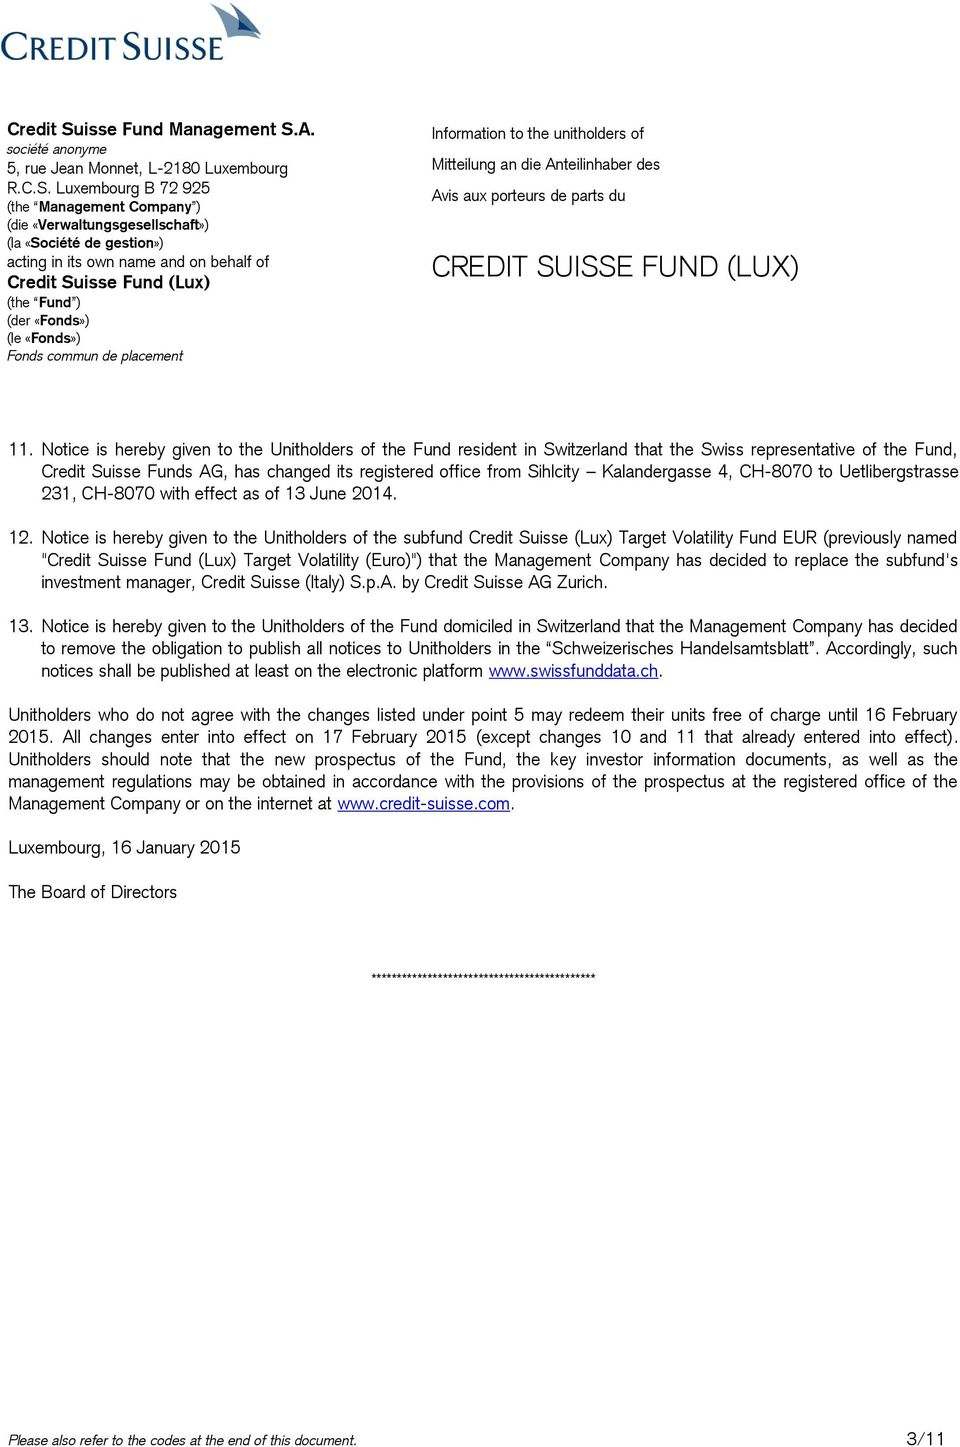 Notice is hereby given to the Unitholders of the subfund Credit Suisse (Lux) Target Volatility Fund EUR (previously named " Target Volatility (Euro)") that the Management Company has decided to